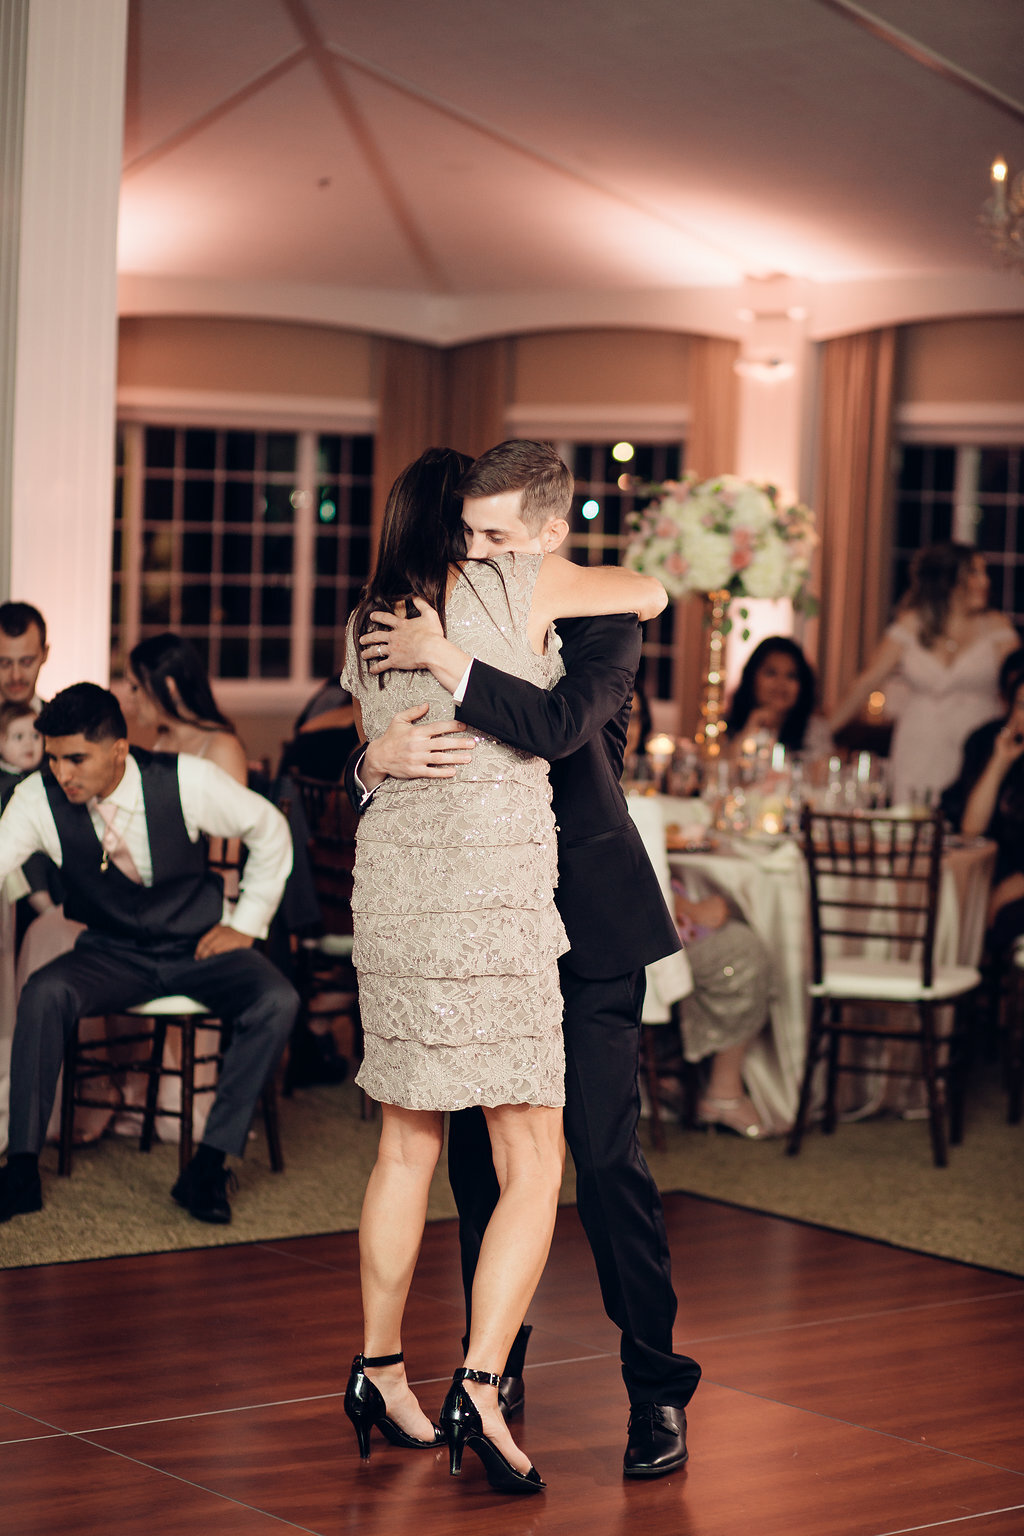 Wedding Photograph Of Groom In Black Suit Hugging a Woman In Light Brown Dress Los Angeles